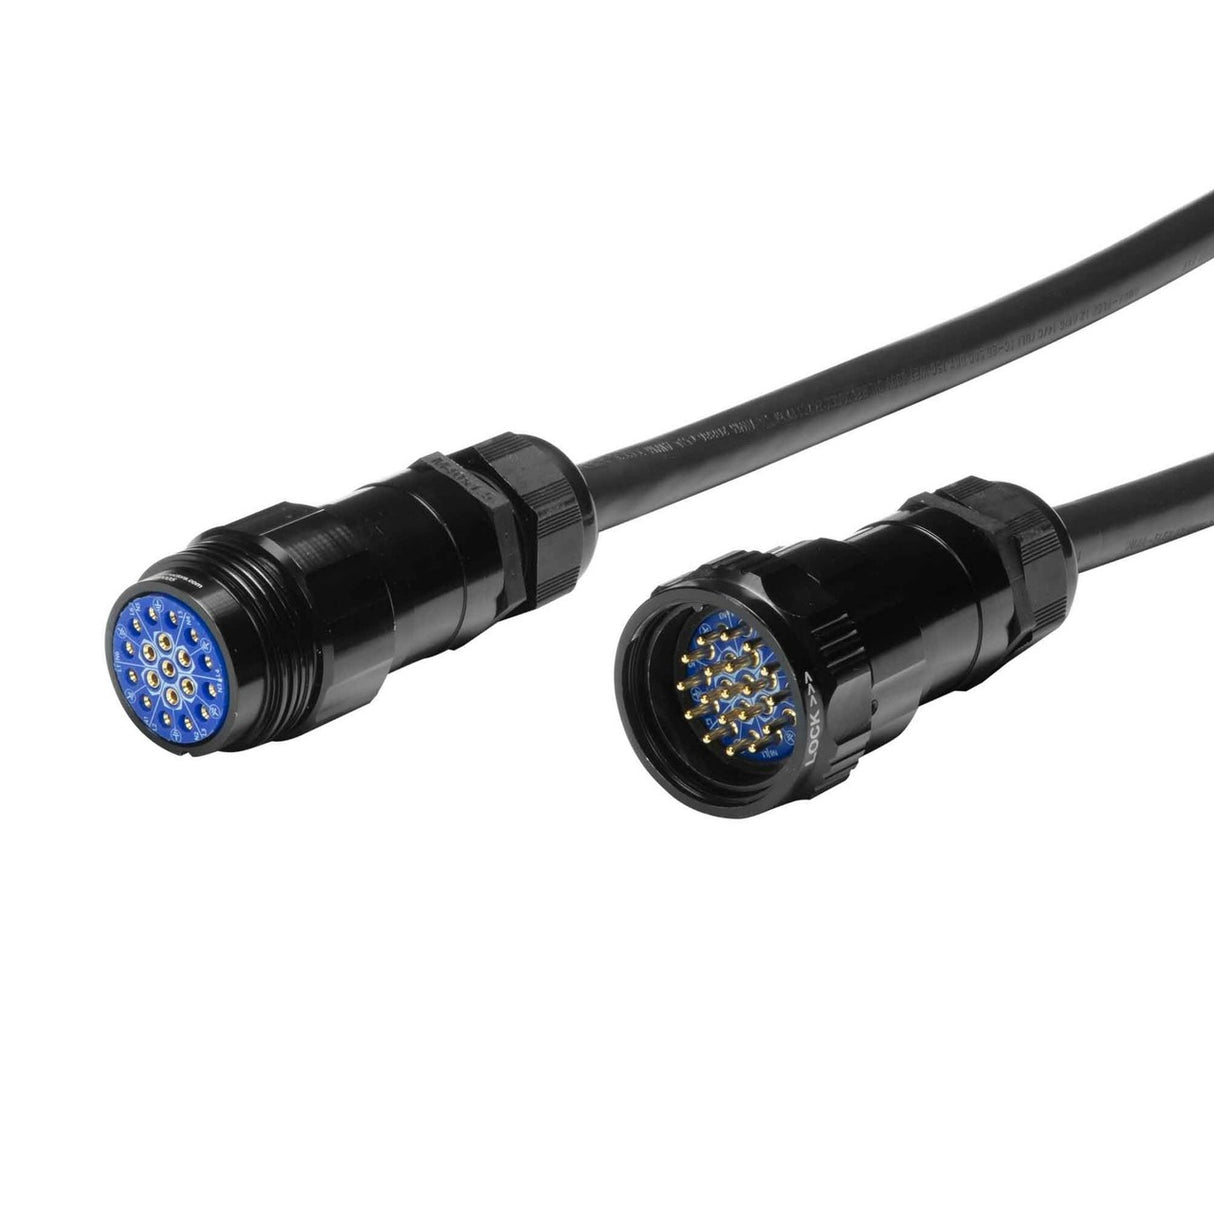 Elite Core 19 Pin Soco Extension Male to Female Lighting Power Cable with Standard Connector, 50 Foot